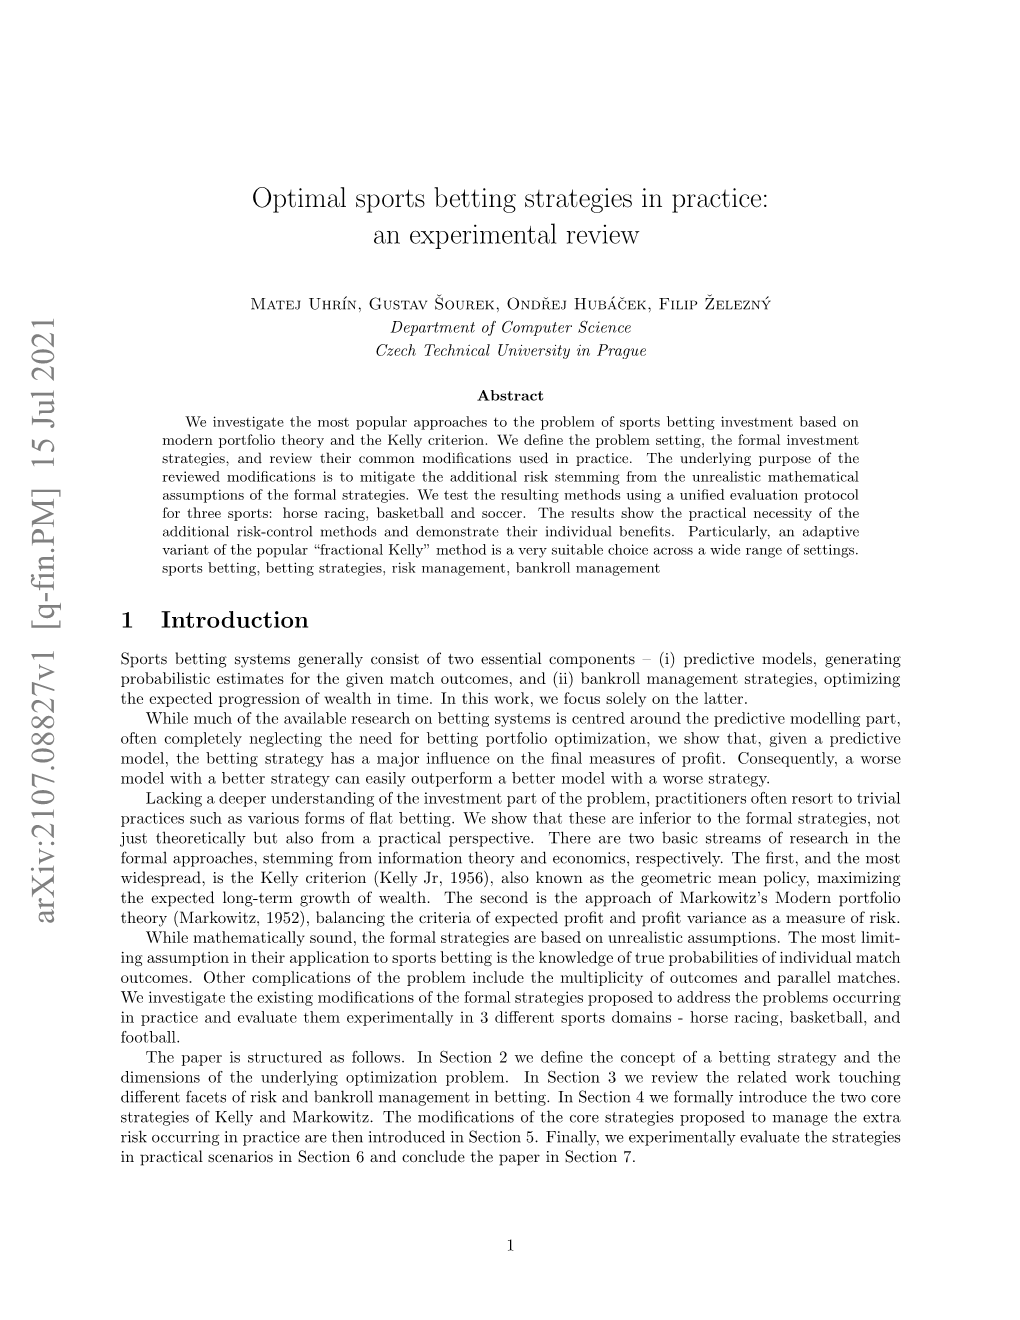 Optimal Sports Betting Strategies in Practice: an Experimental Review